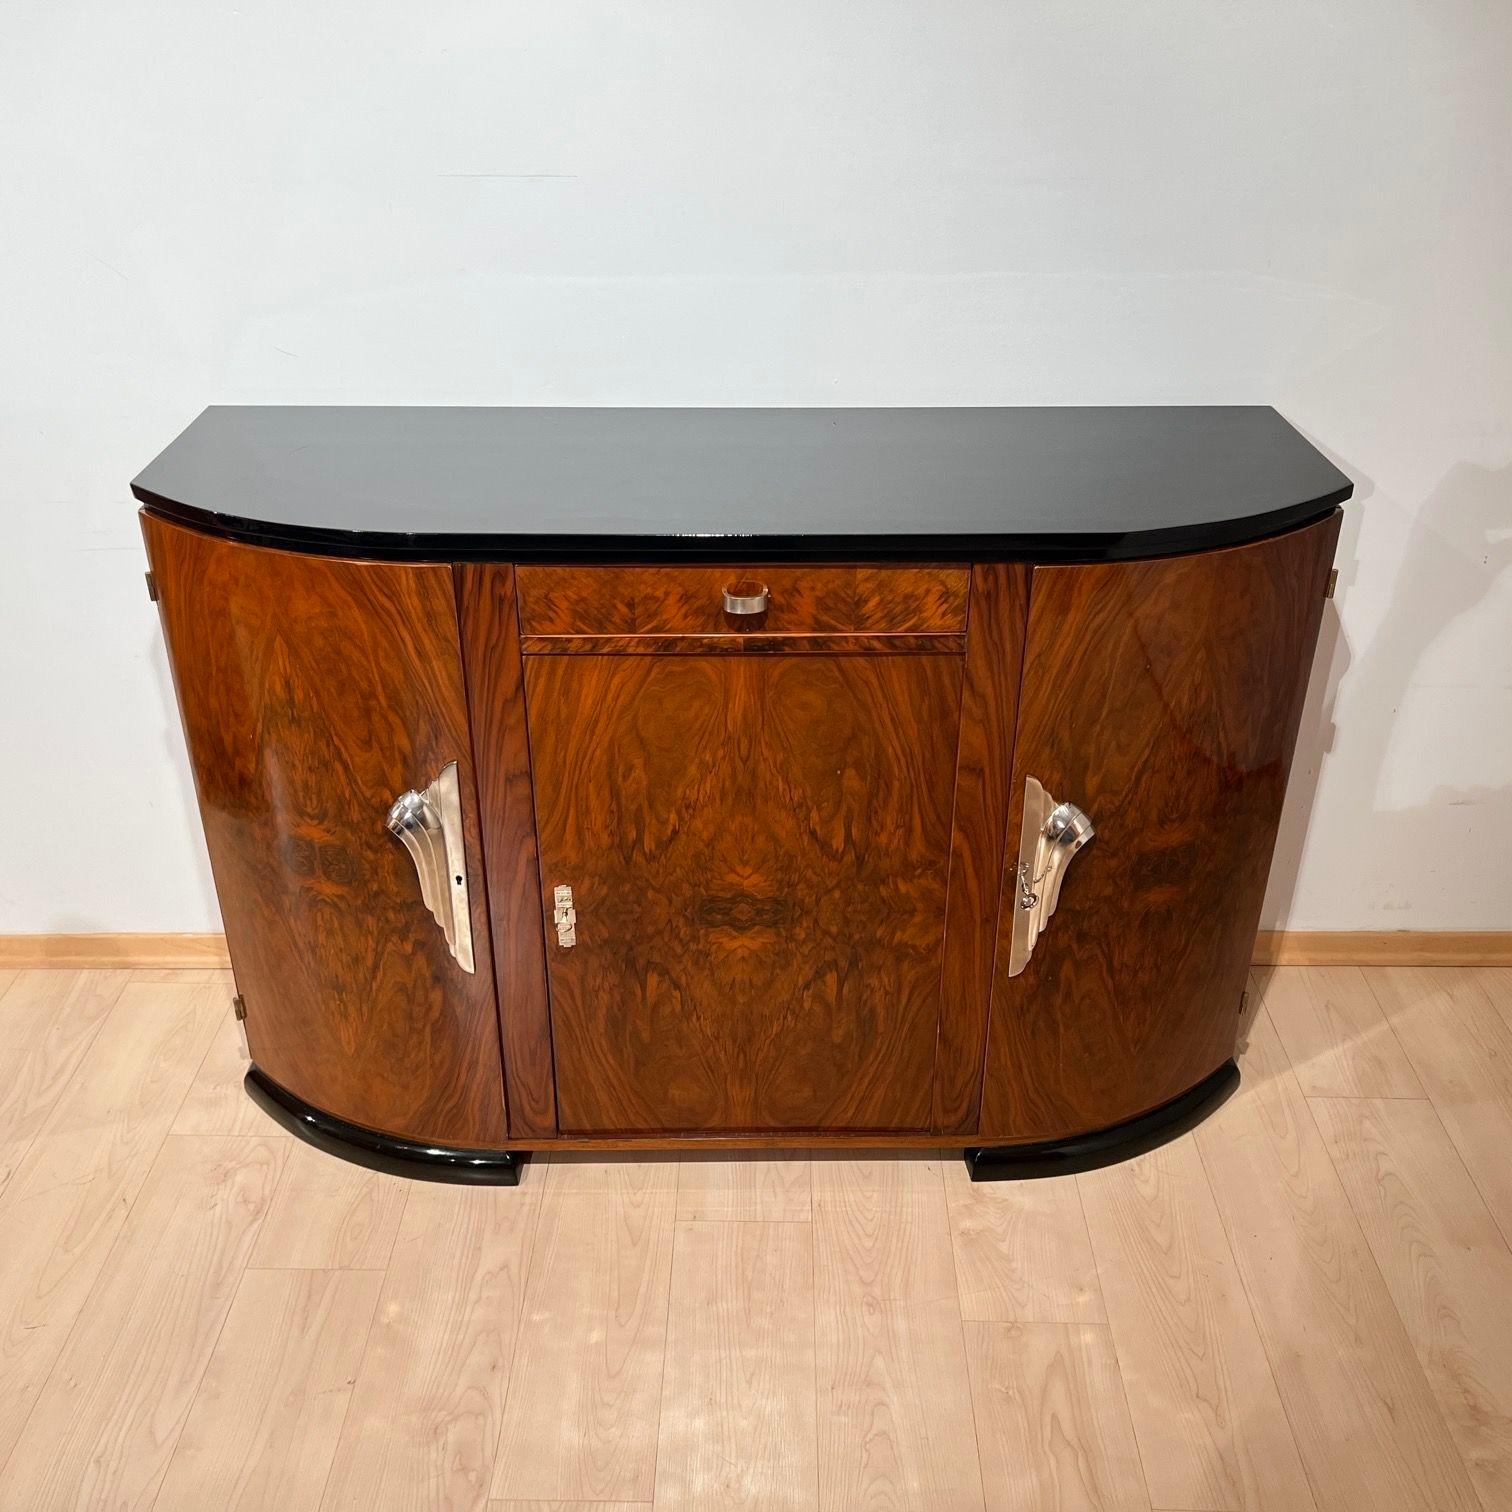 French Art Deco Sideboard, Walnut Veneer, Black Lacquer, Nickel, France circa 1930 For Sale